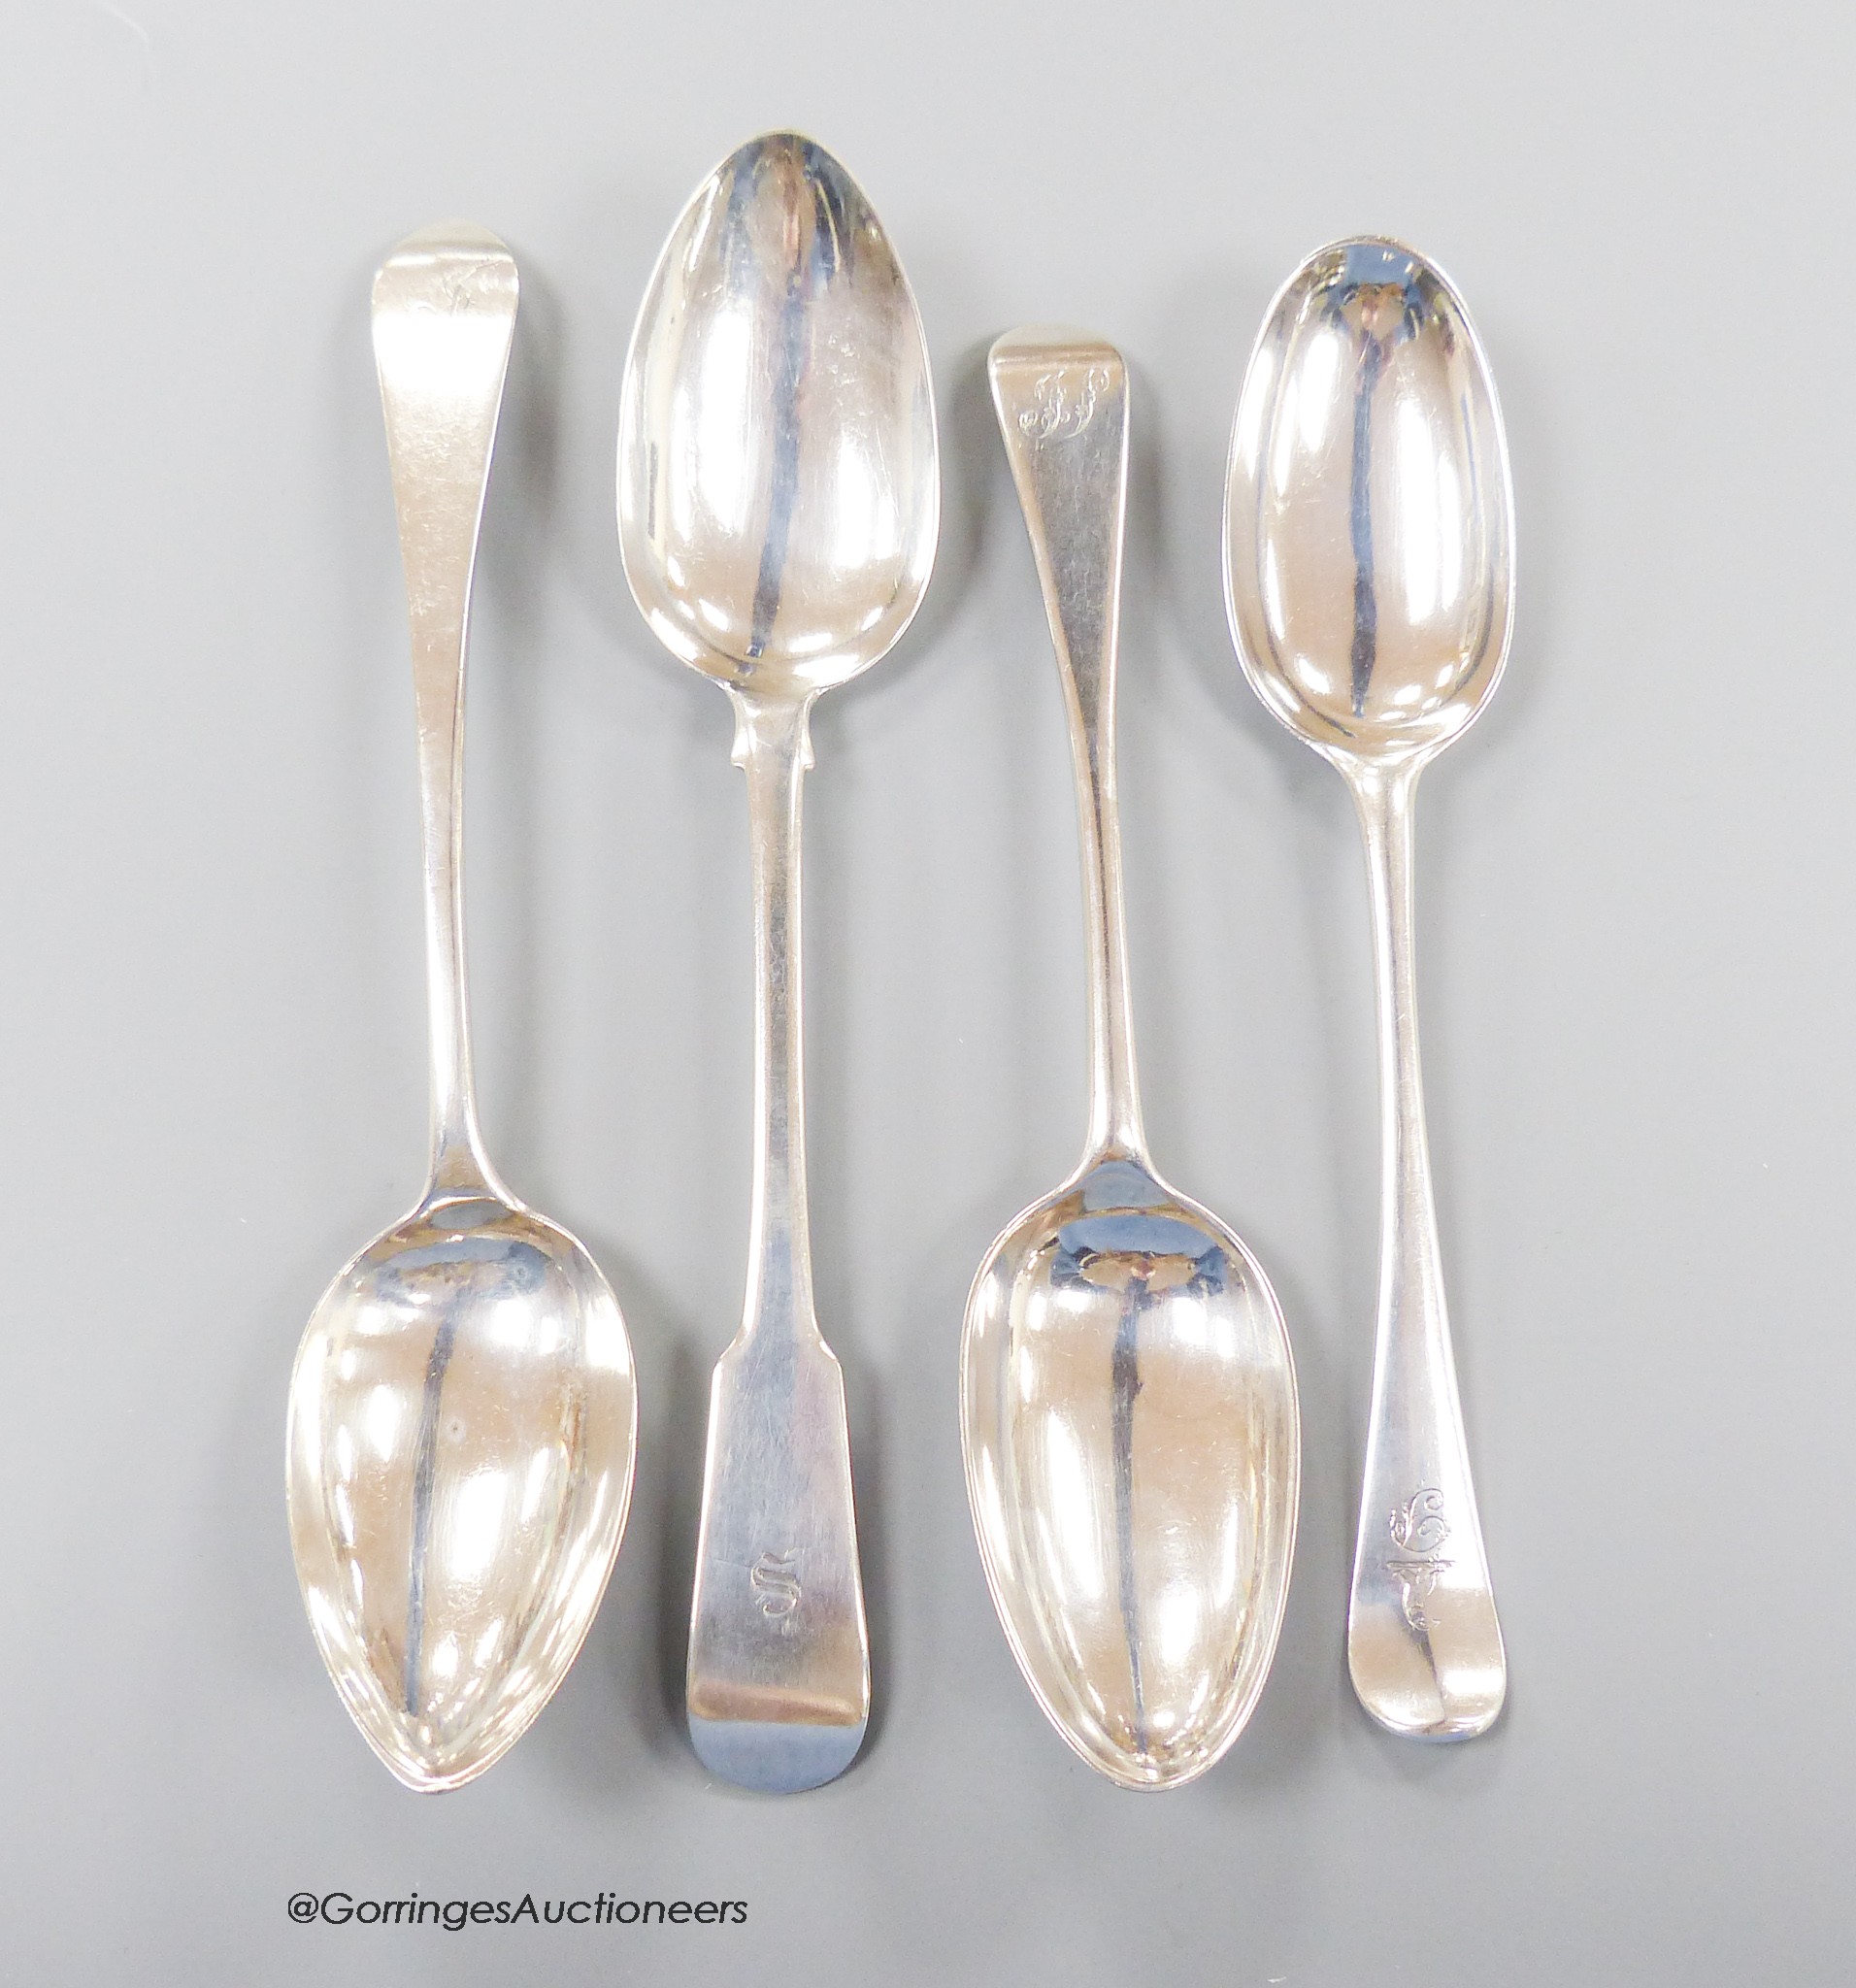 Three 18th century Scottish provincial Dundee table spoons (John Steven, William Scott and James Douglas) and a later fiddle pattern tablespoon, possibly Dundee?, 23cm, 8.5oz.                                             